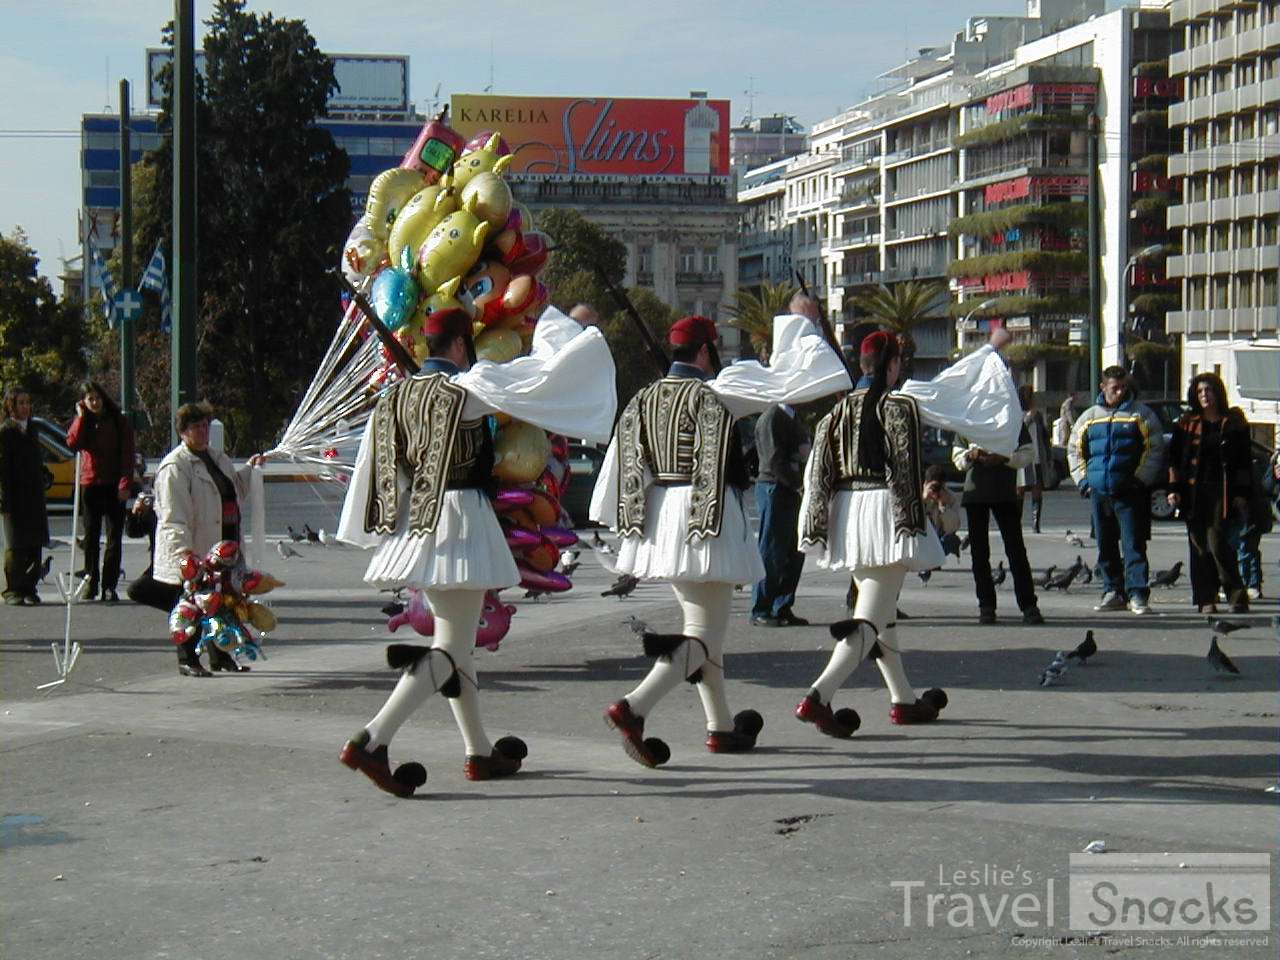 Greek guards marching during shift change.